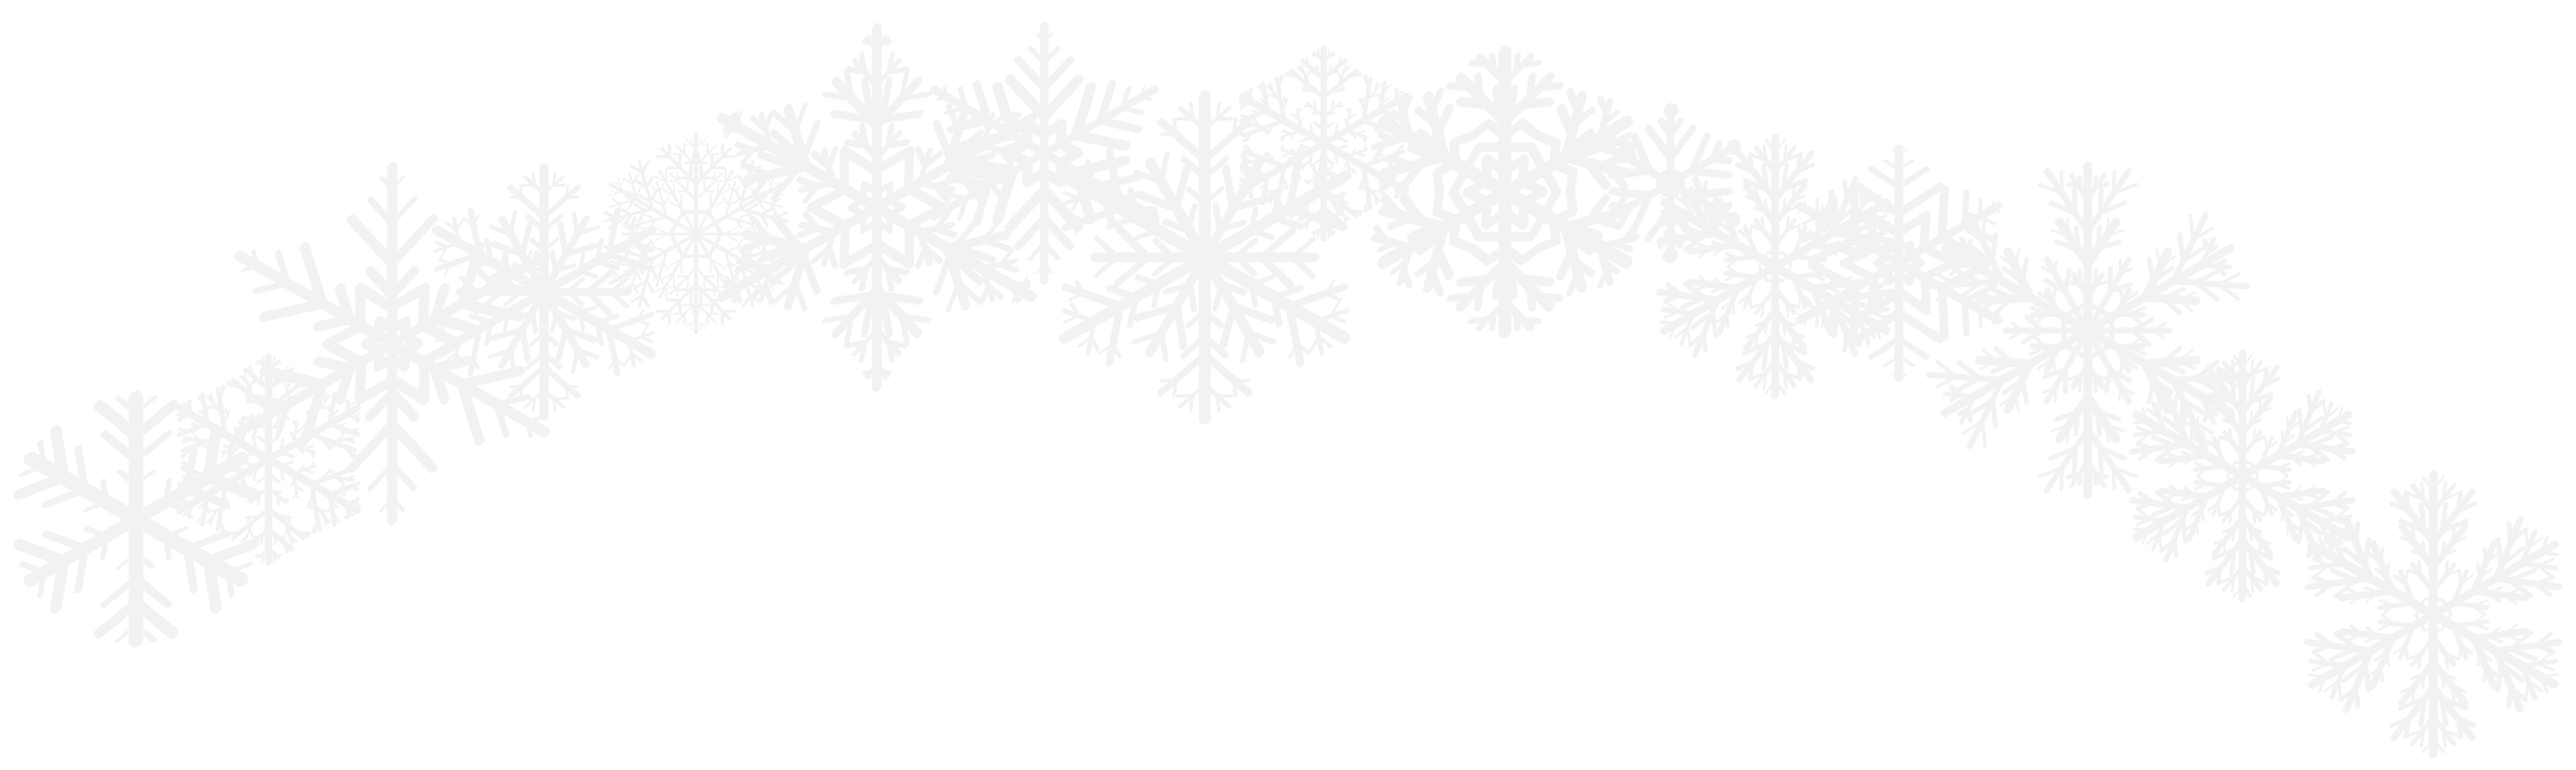 lace clipart snowflake